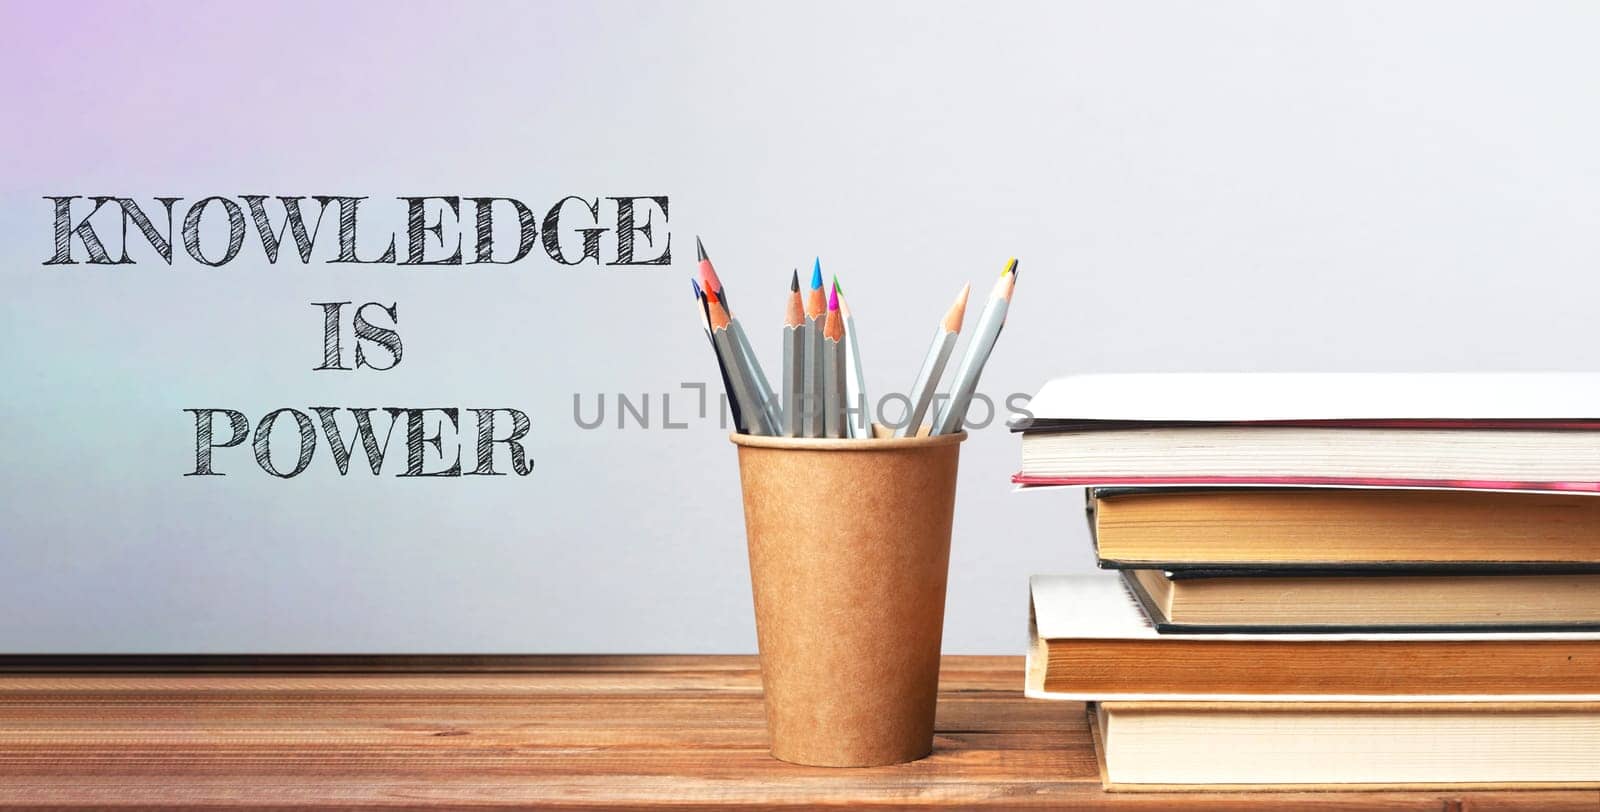 A wooden desk with a cup of pencils and a stack of books. The words knowledge is power are written on the wall behind the desk